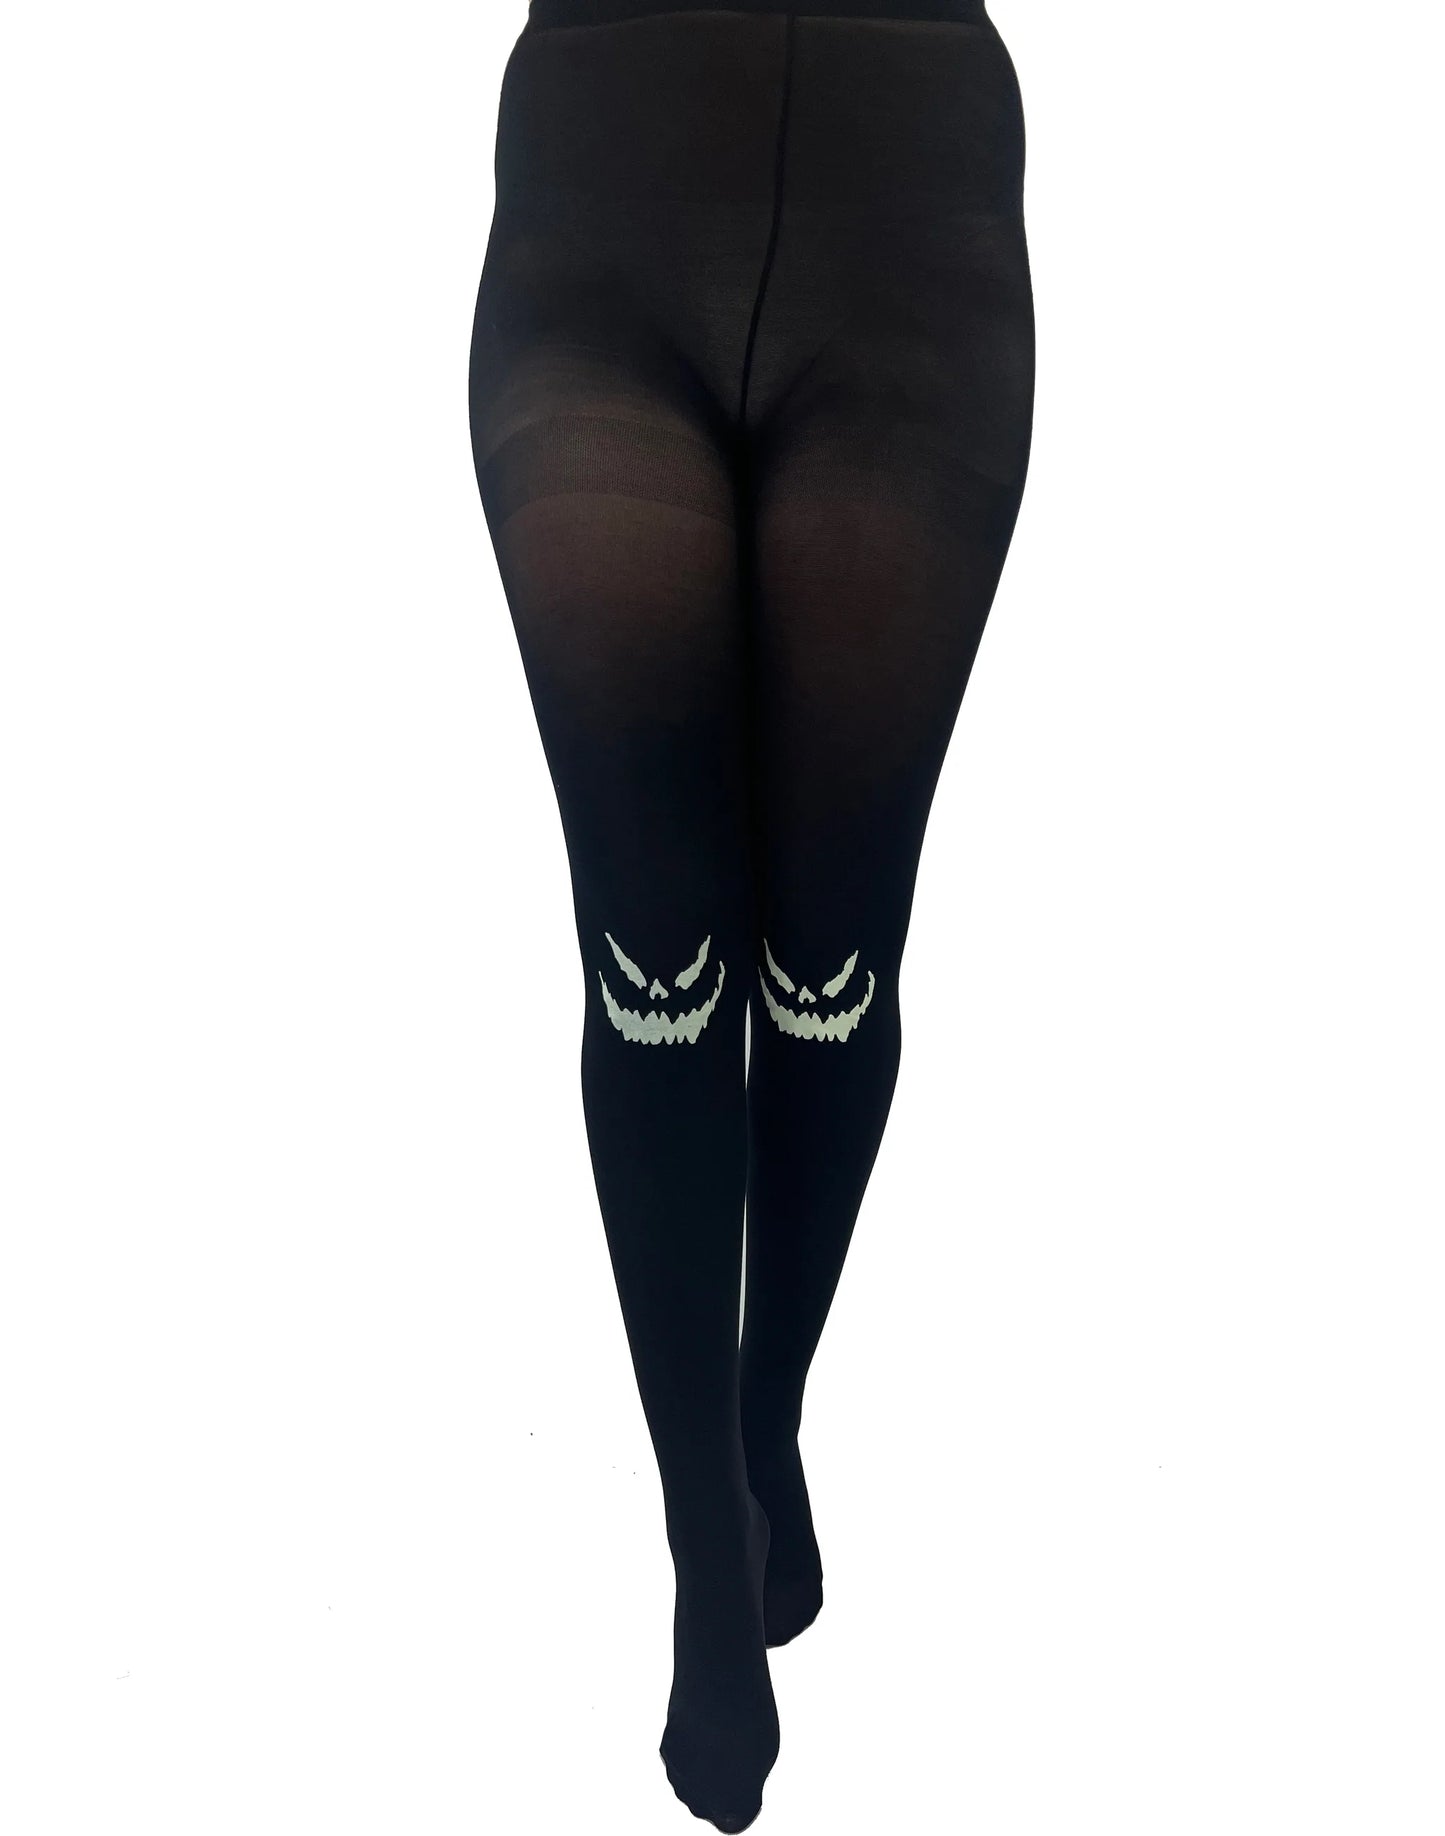 Pamela Mann Spooky Face Tights - Black opaque tights with a glow in the dark Jack-o'-lantern style face on the knees, perfect for Halloween.